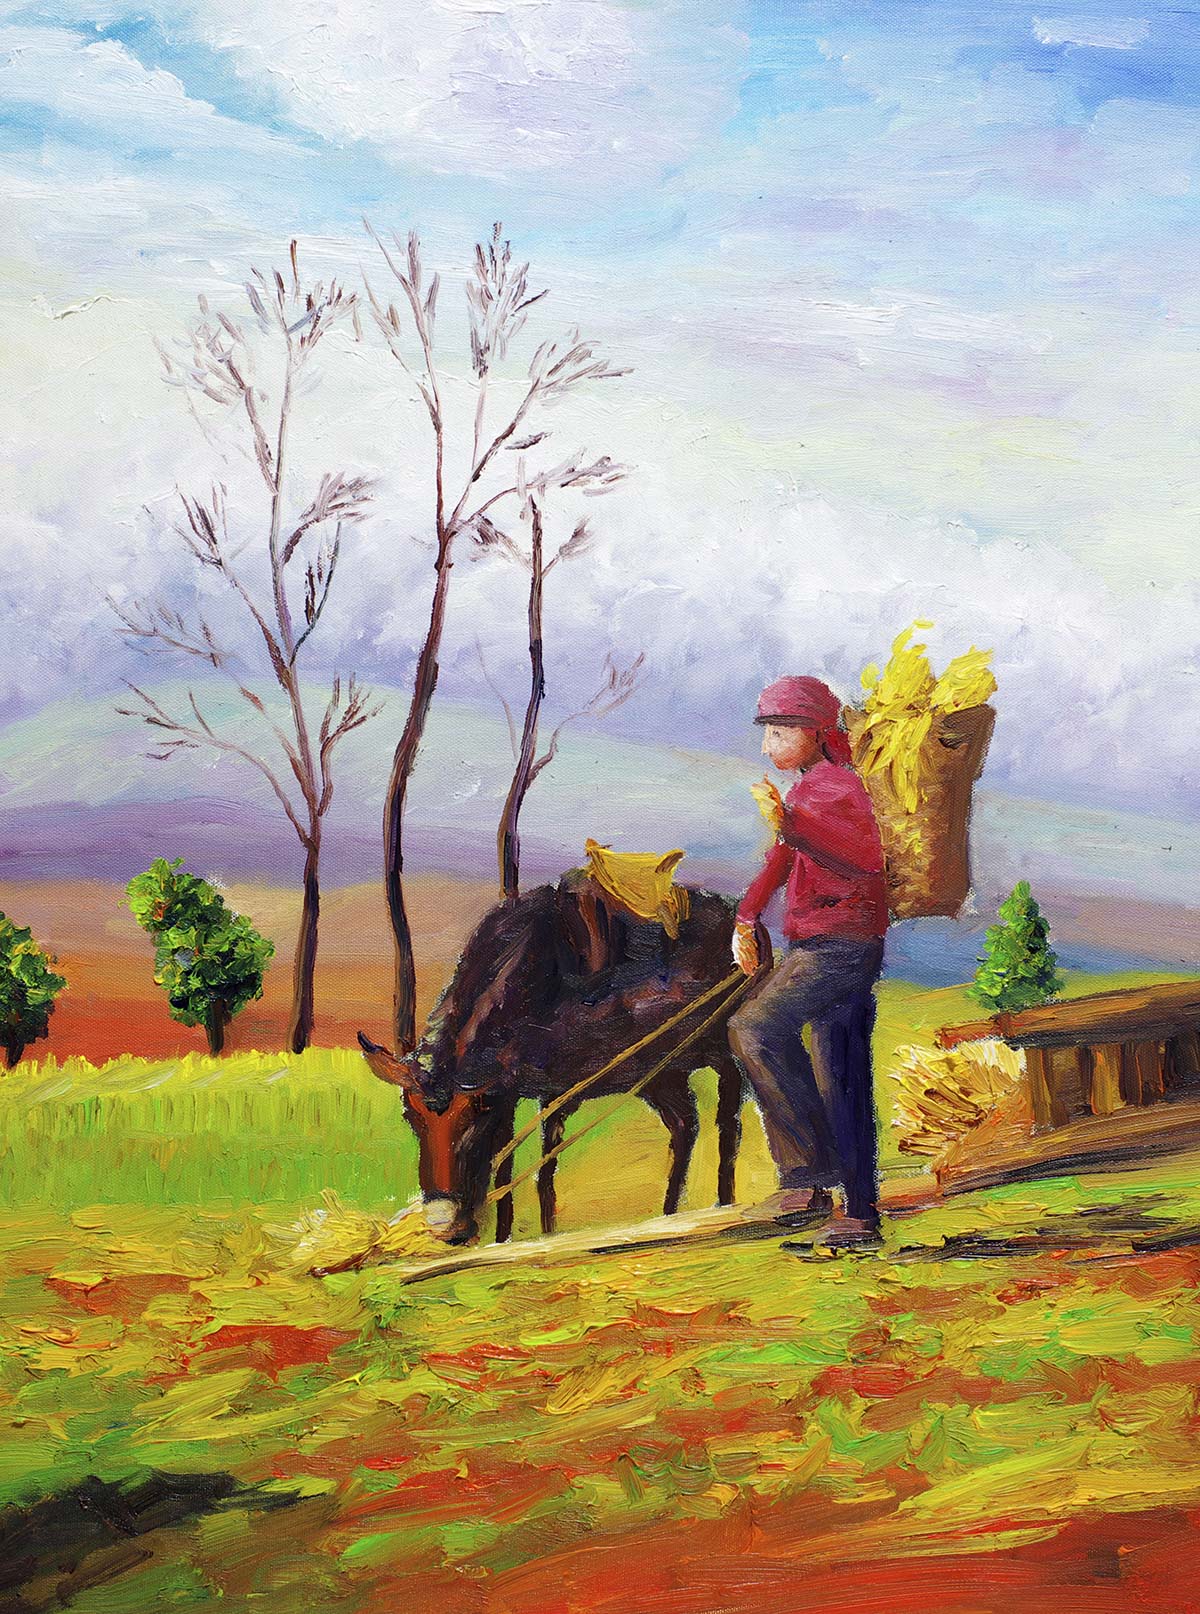 A painting of a man with a donkey and a hay bale